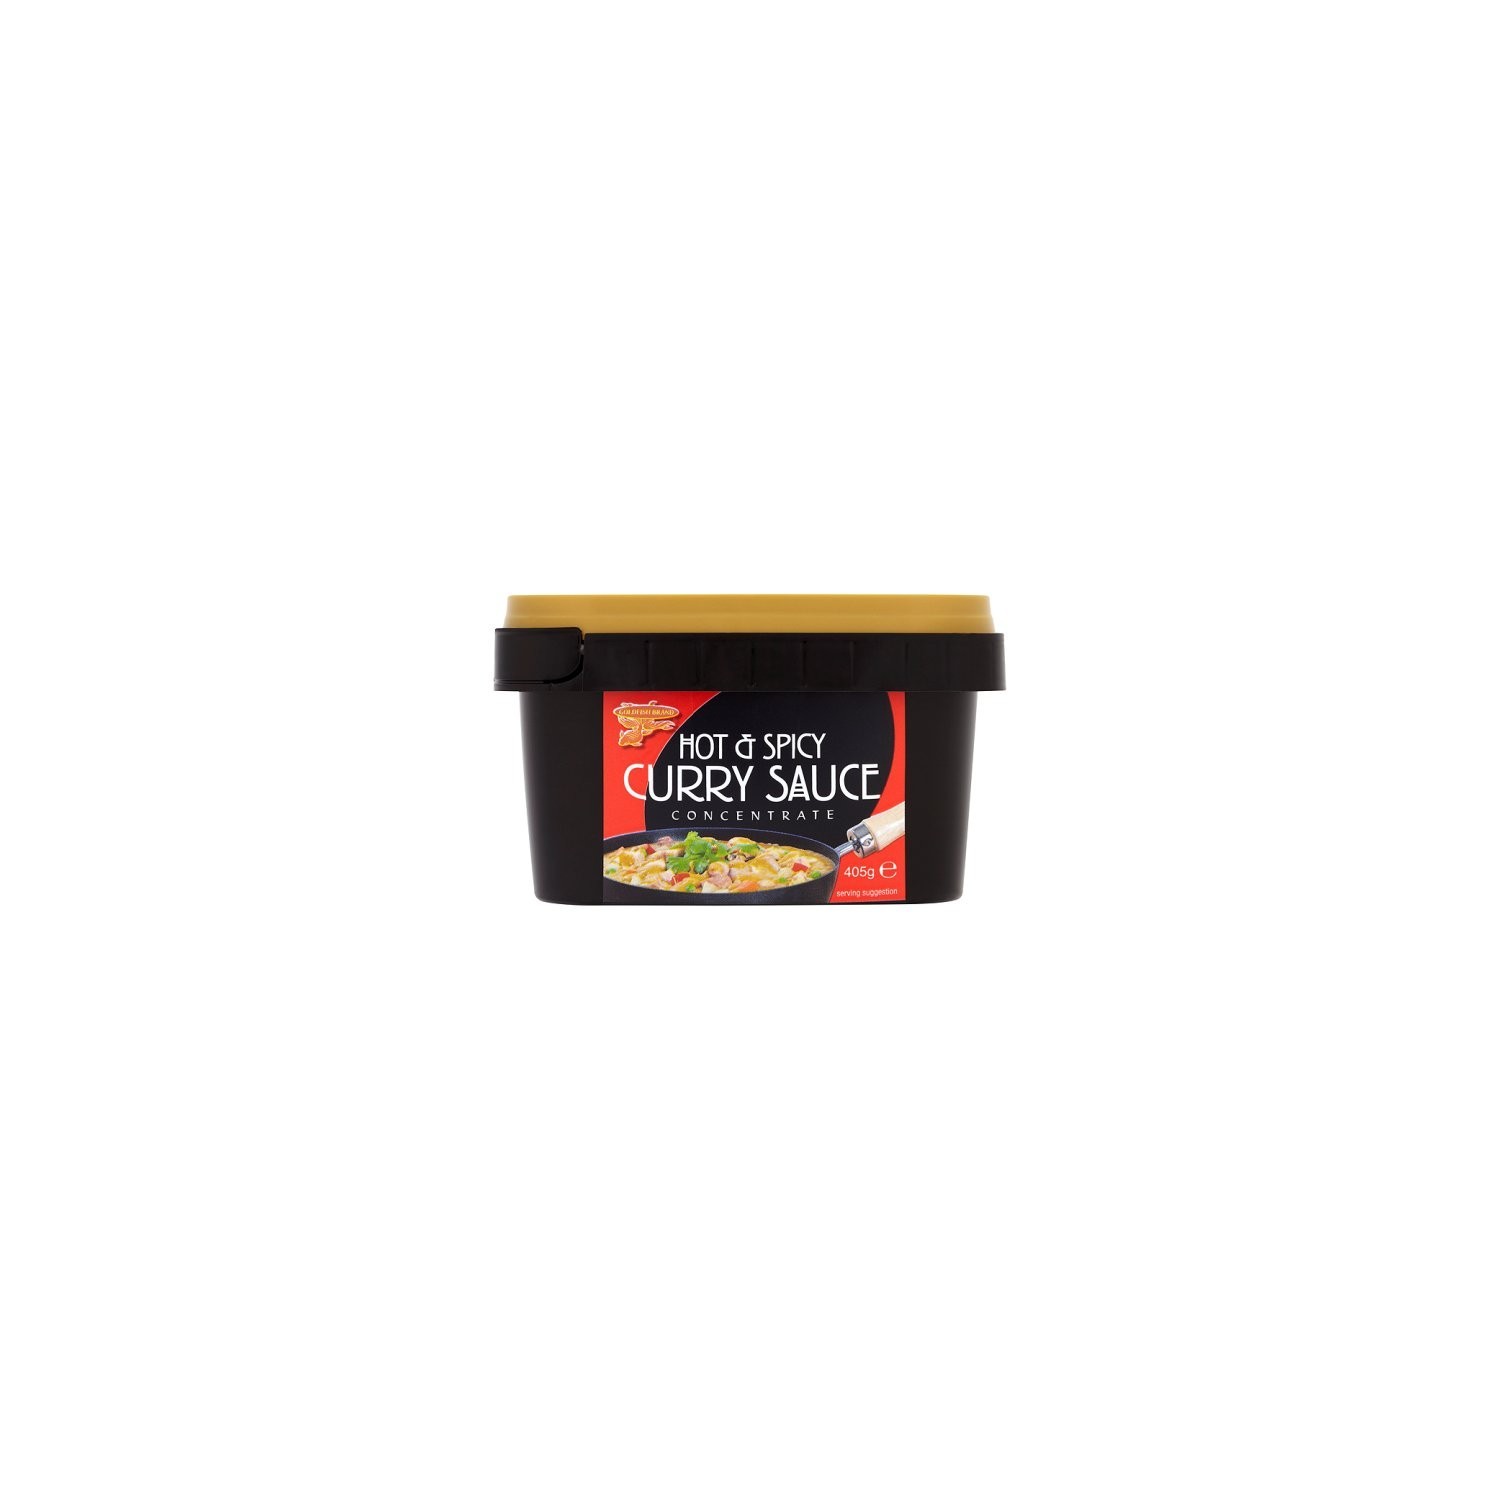 Goldfish Brand Hot & Spicy Curry Sauce 6x405g Concentrate (old black tub)